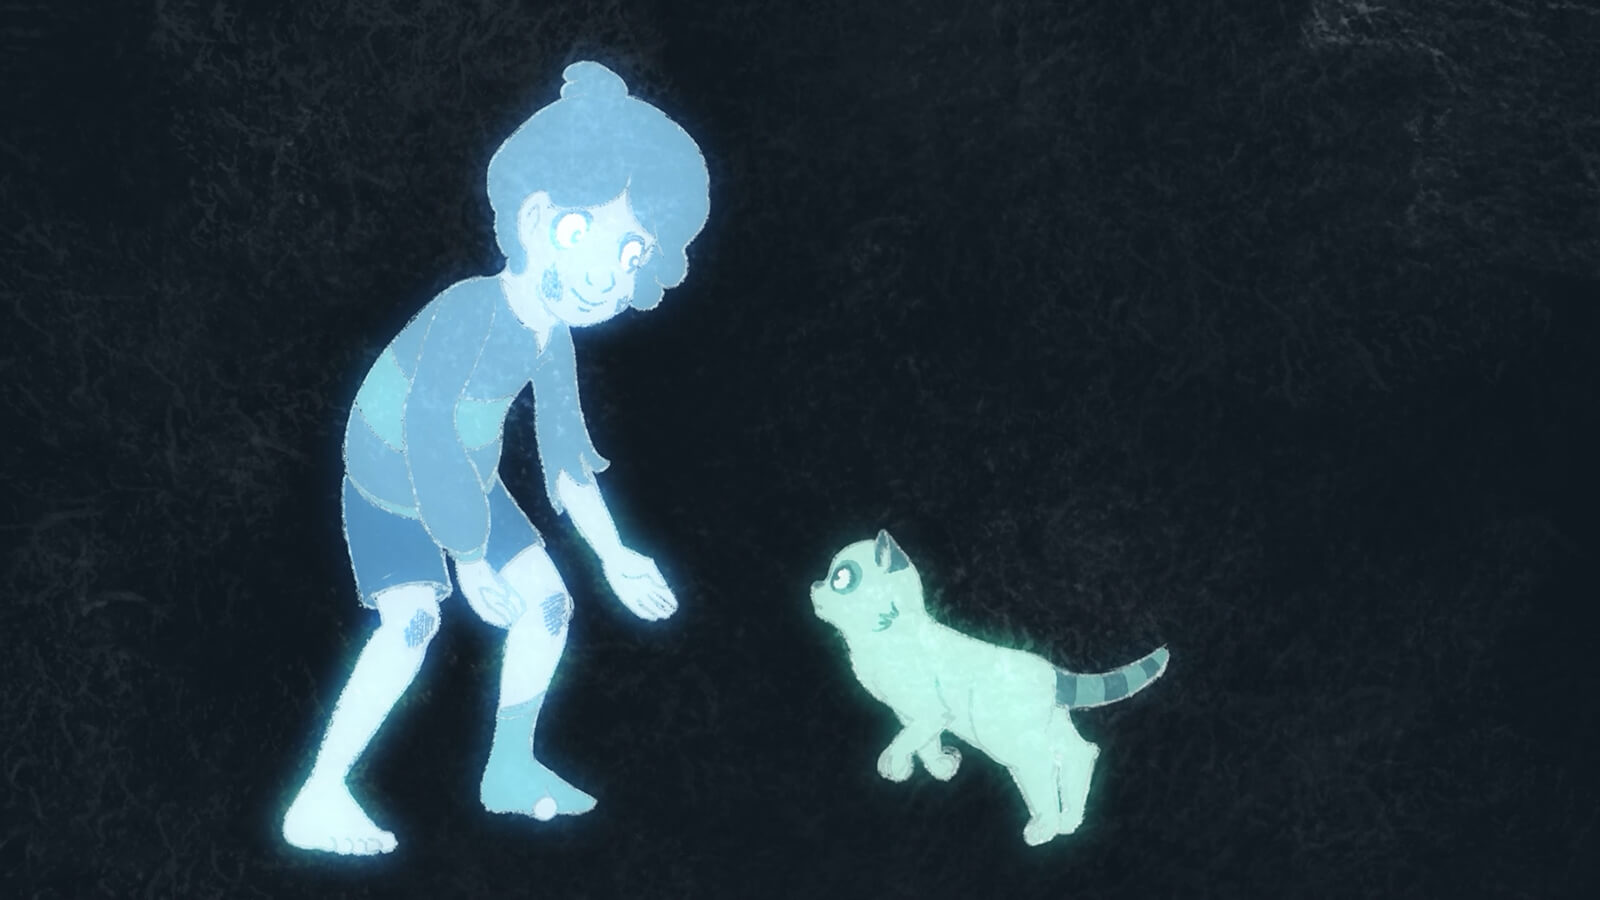 Both a young boy and a white cat with a striped tail glow a light color as they reach out to each other